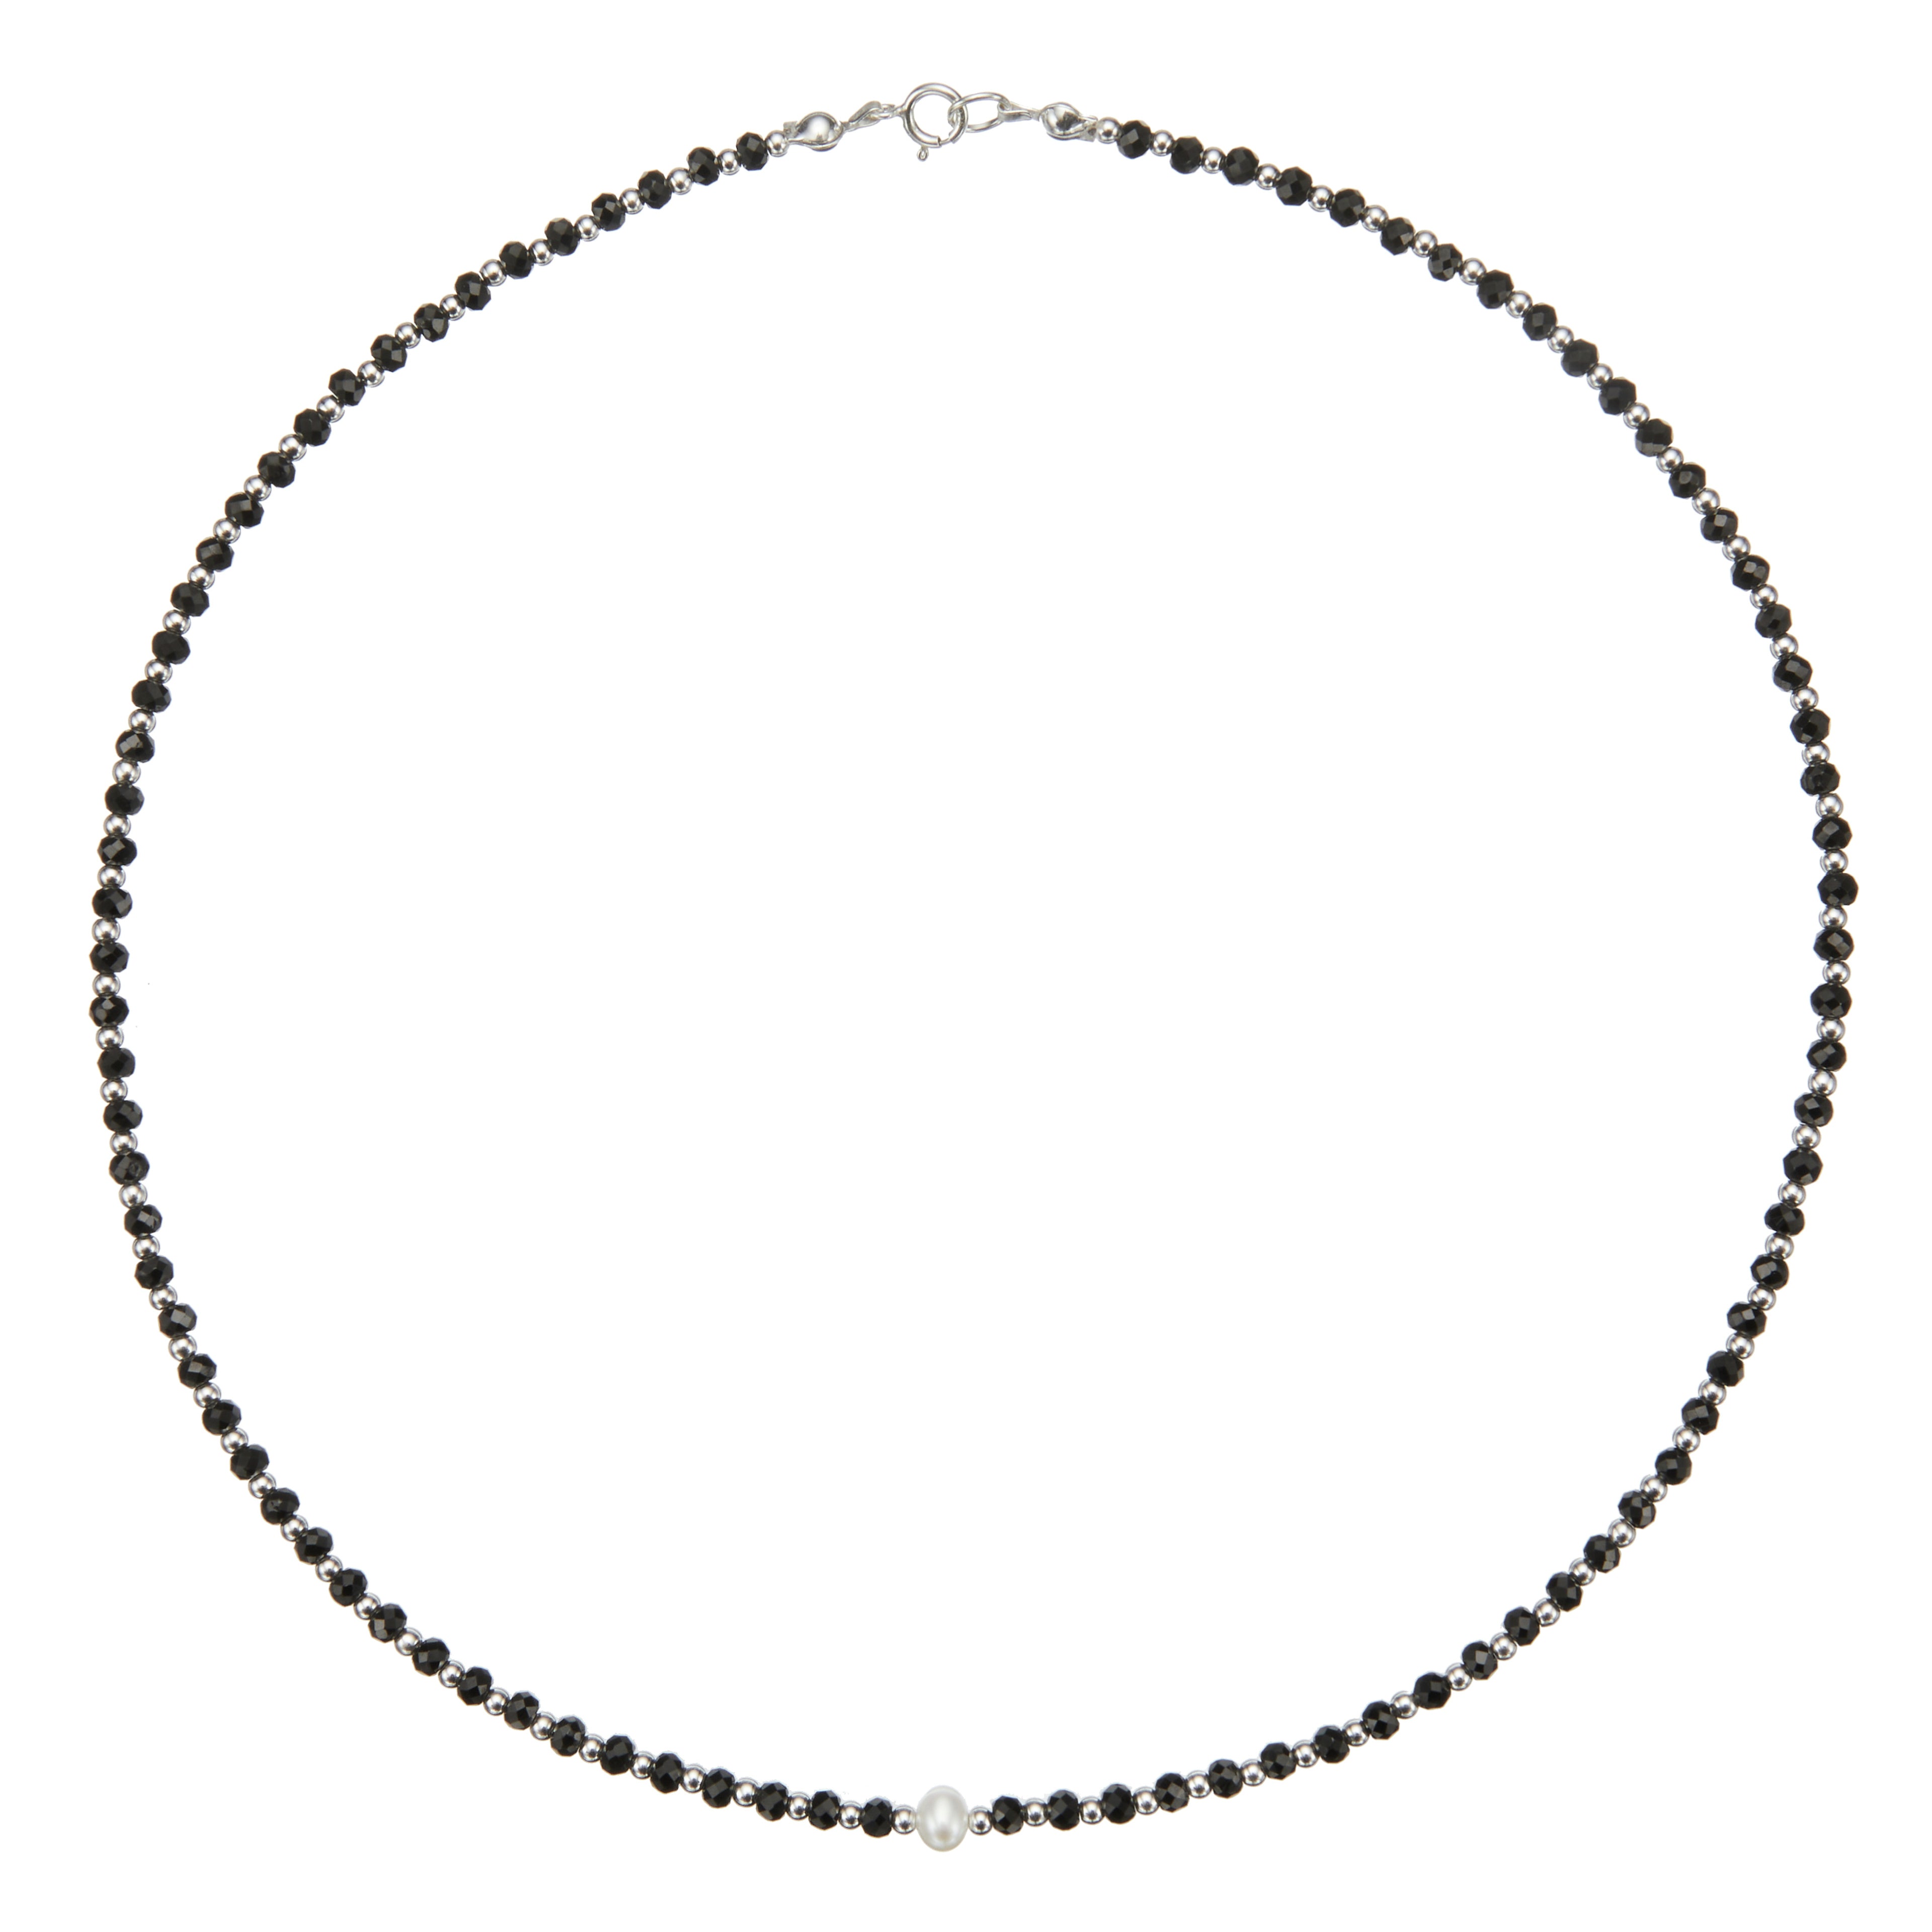 Silver spinel gemstone choker on a white background